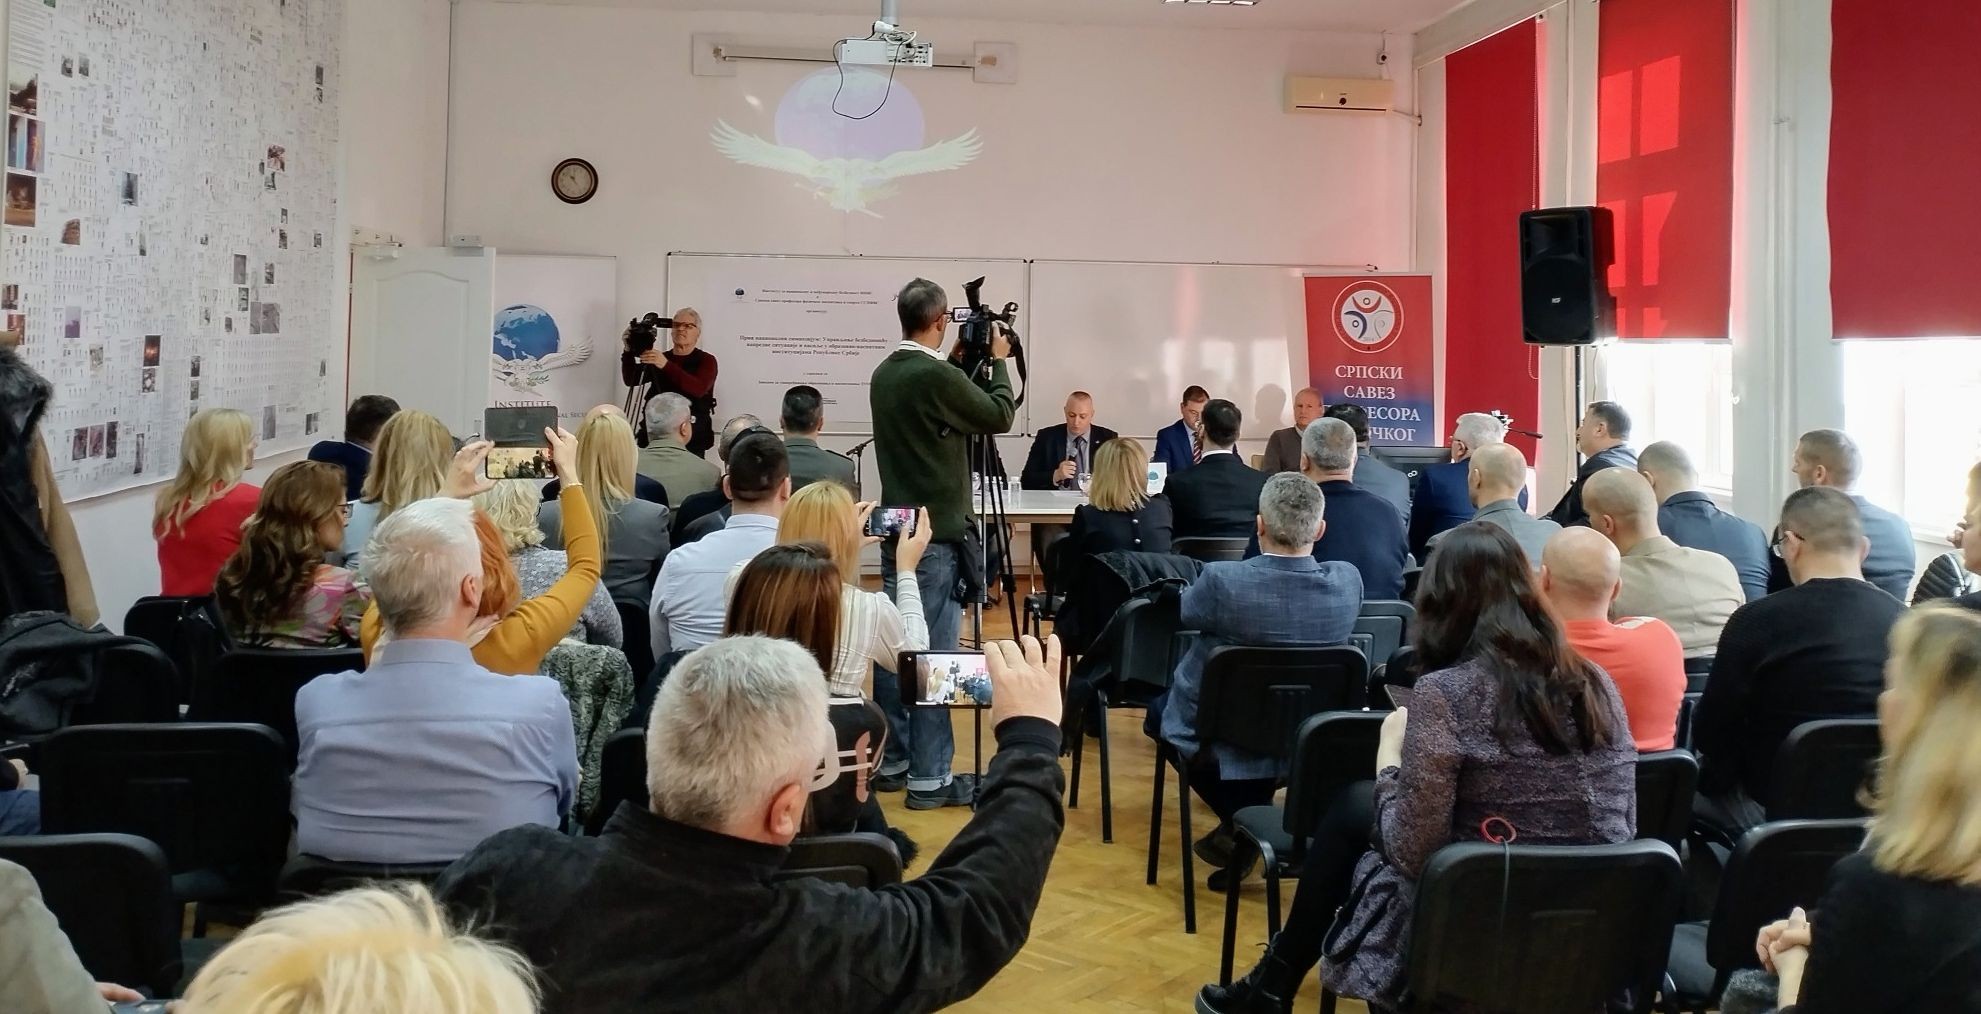 The report – The first national symposium: Security management – emergency situations and violence in educational institutions of the Republic of Serbia